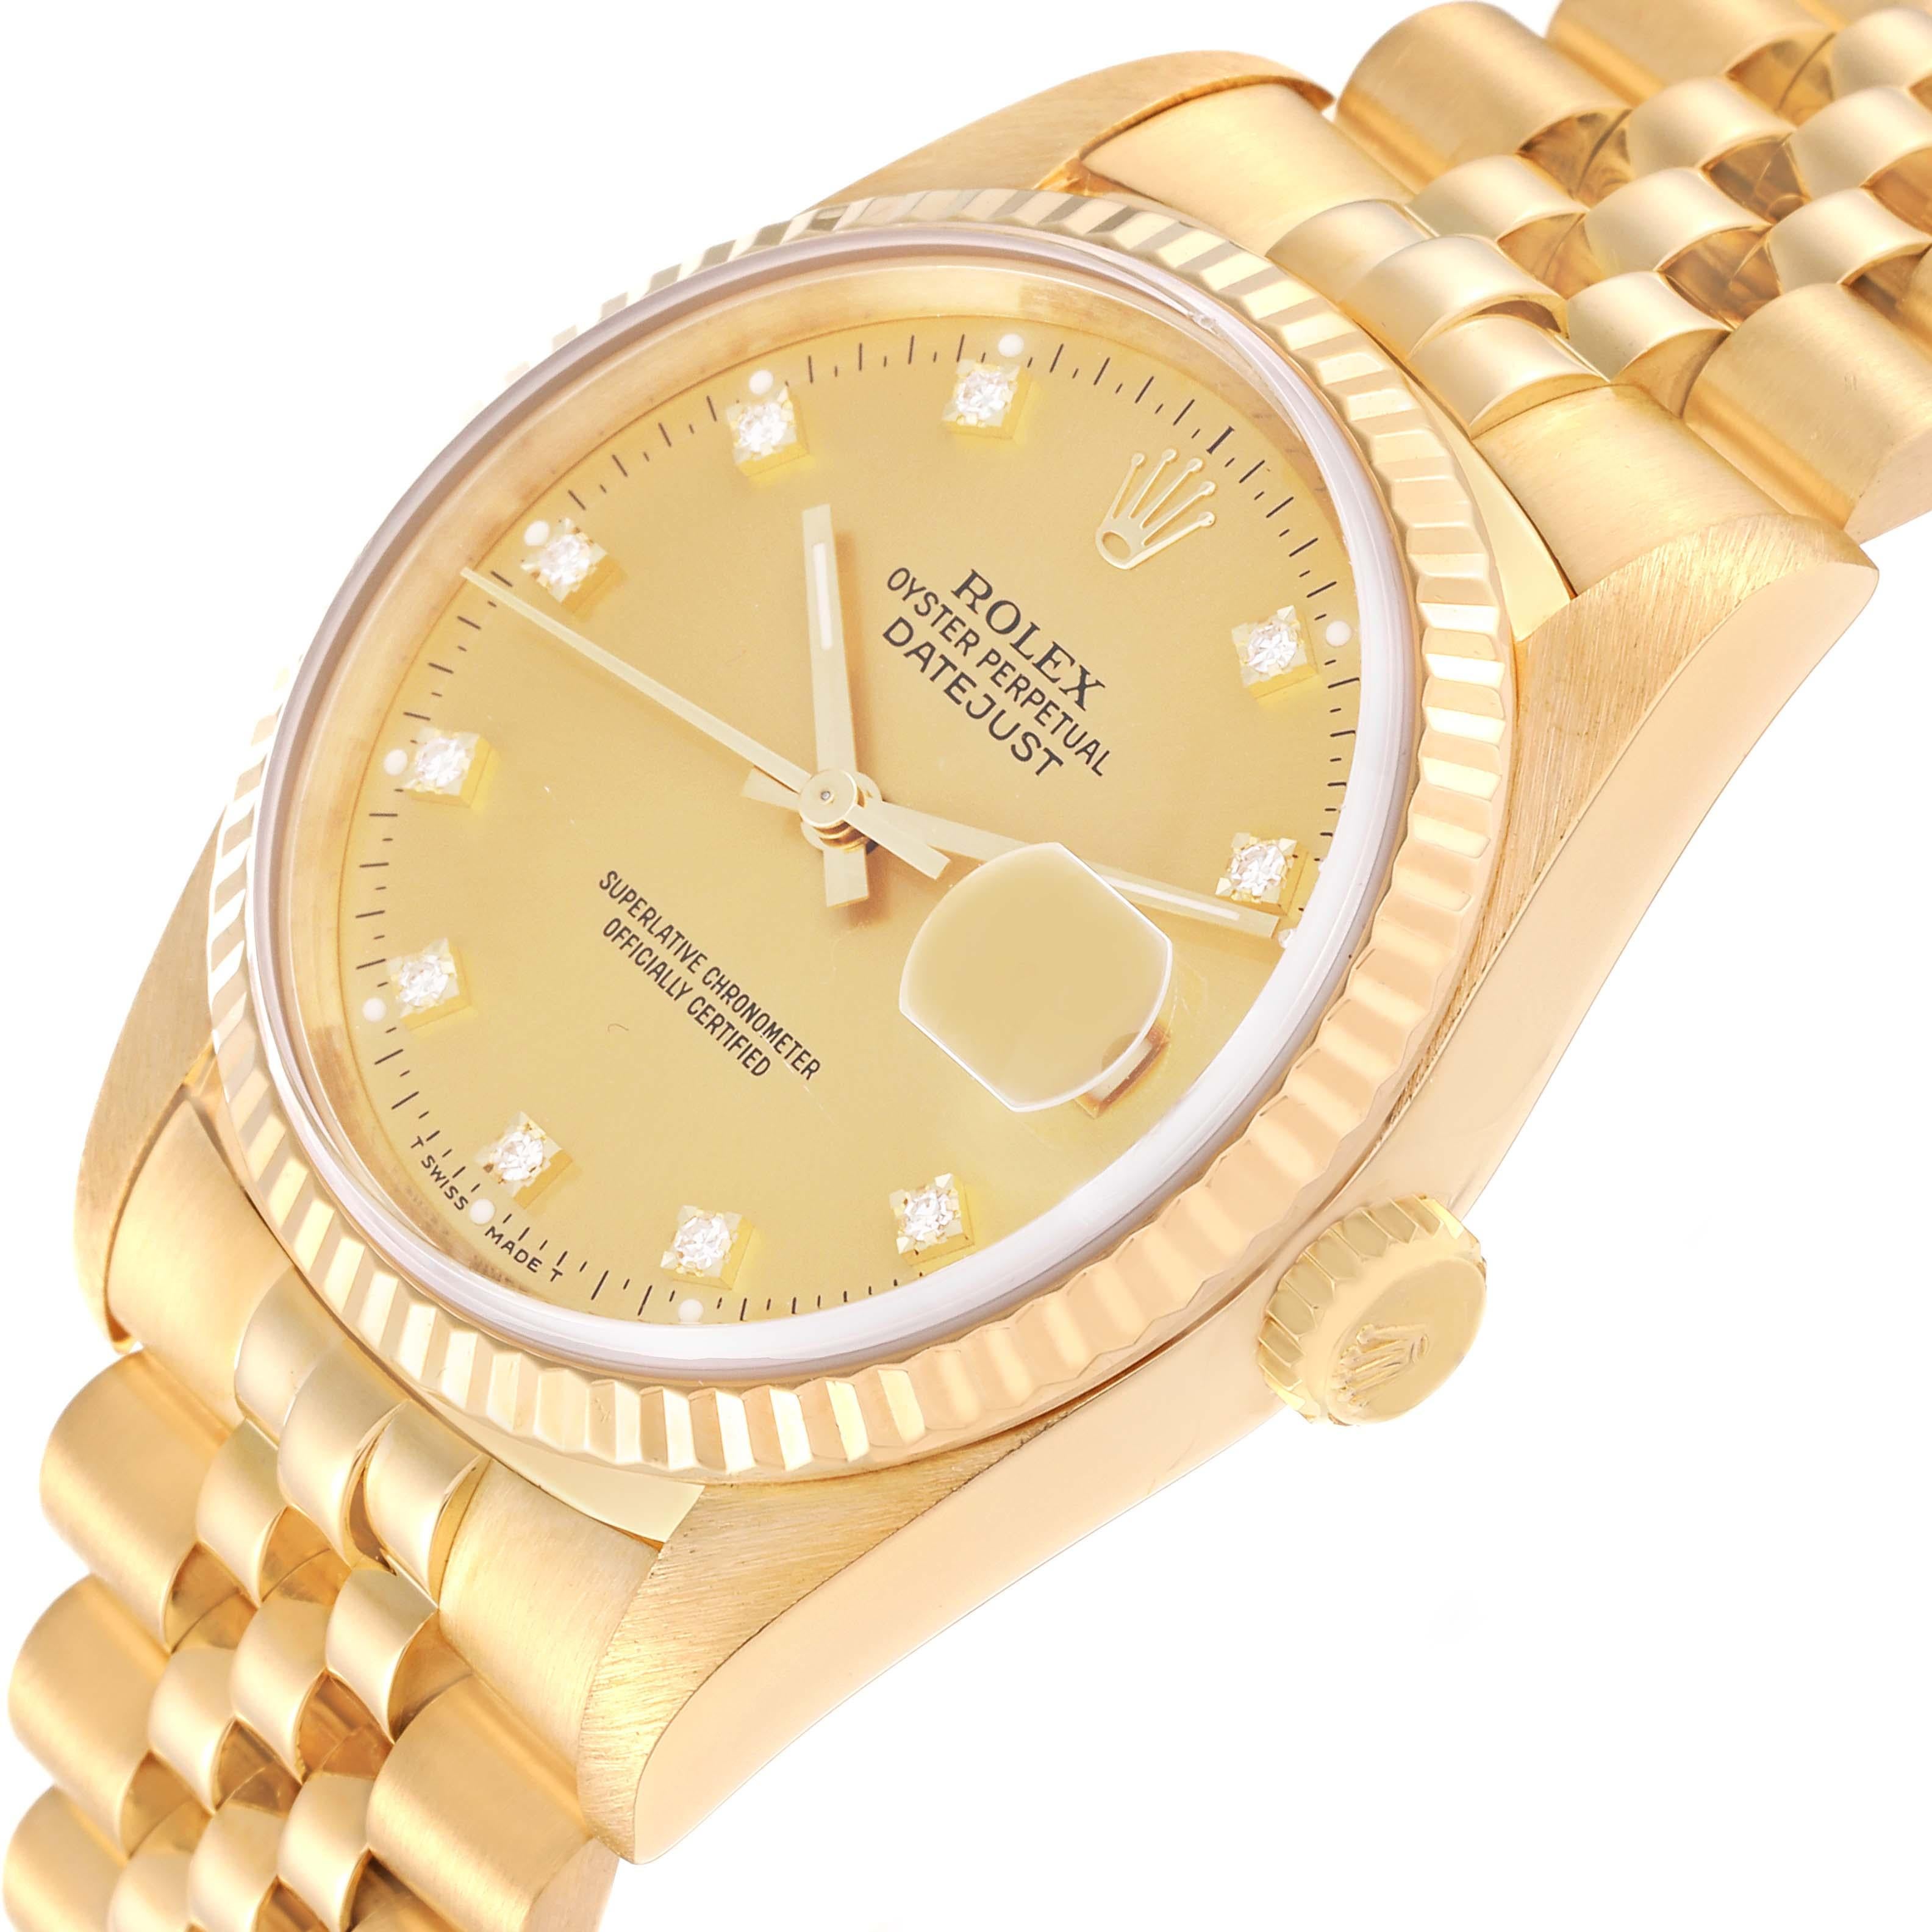 Rolex Datejust Yellow Gold Champagne Diamond Dial Mens Watch 16238 1